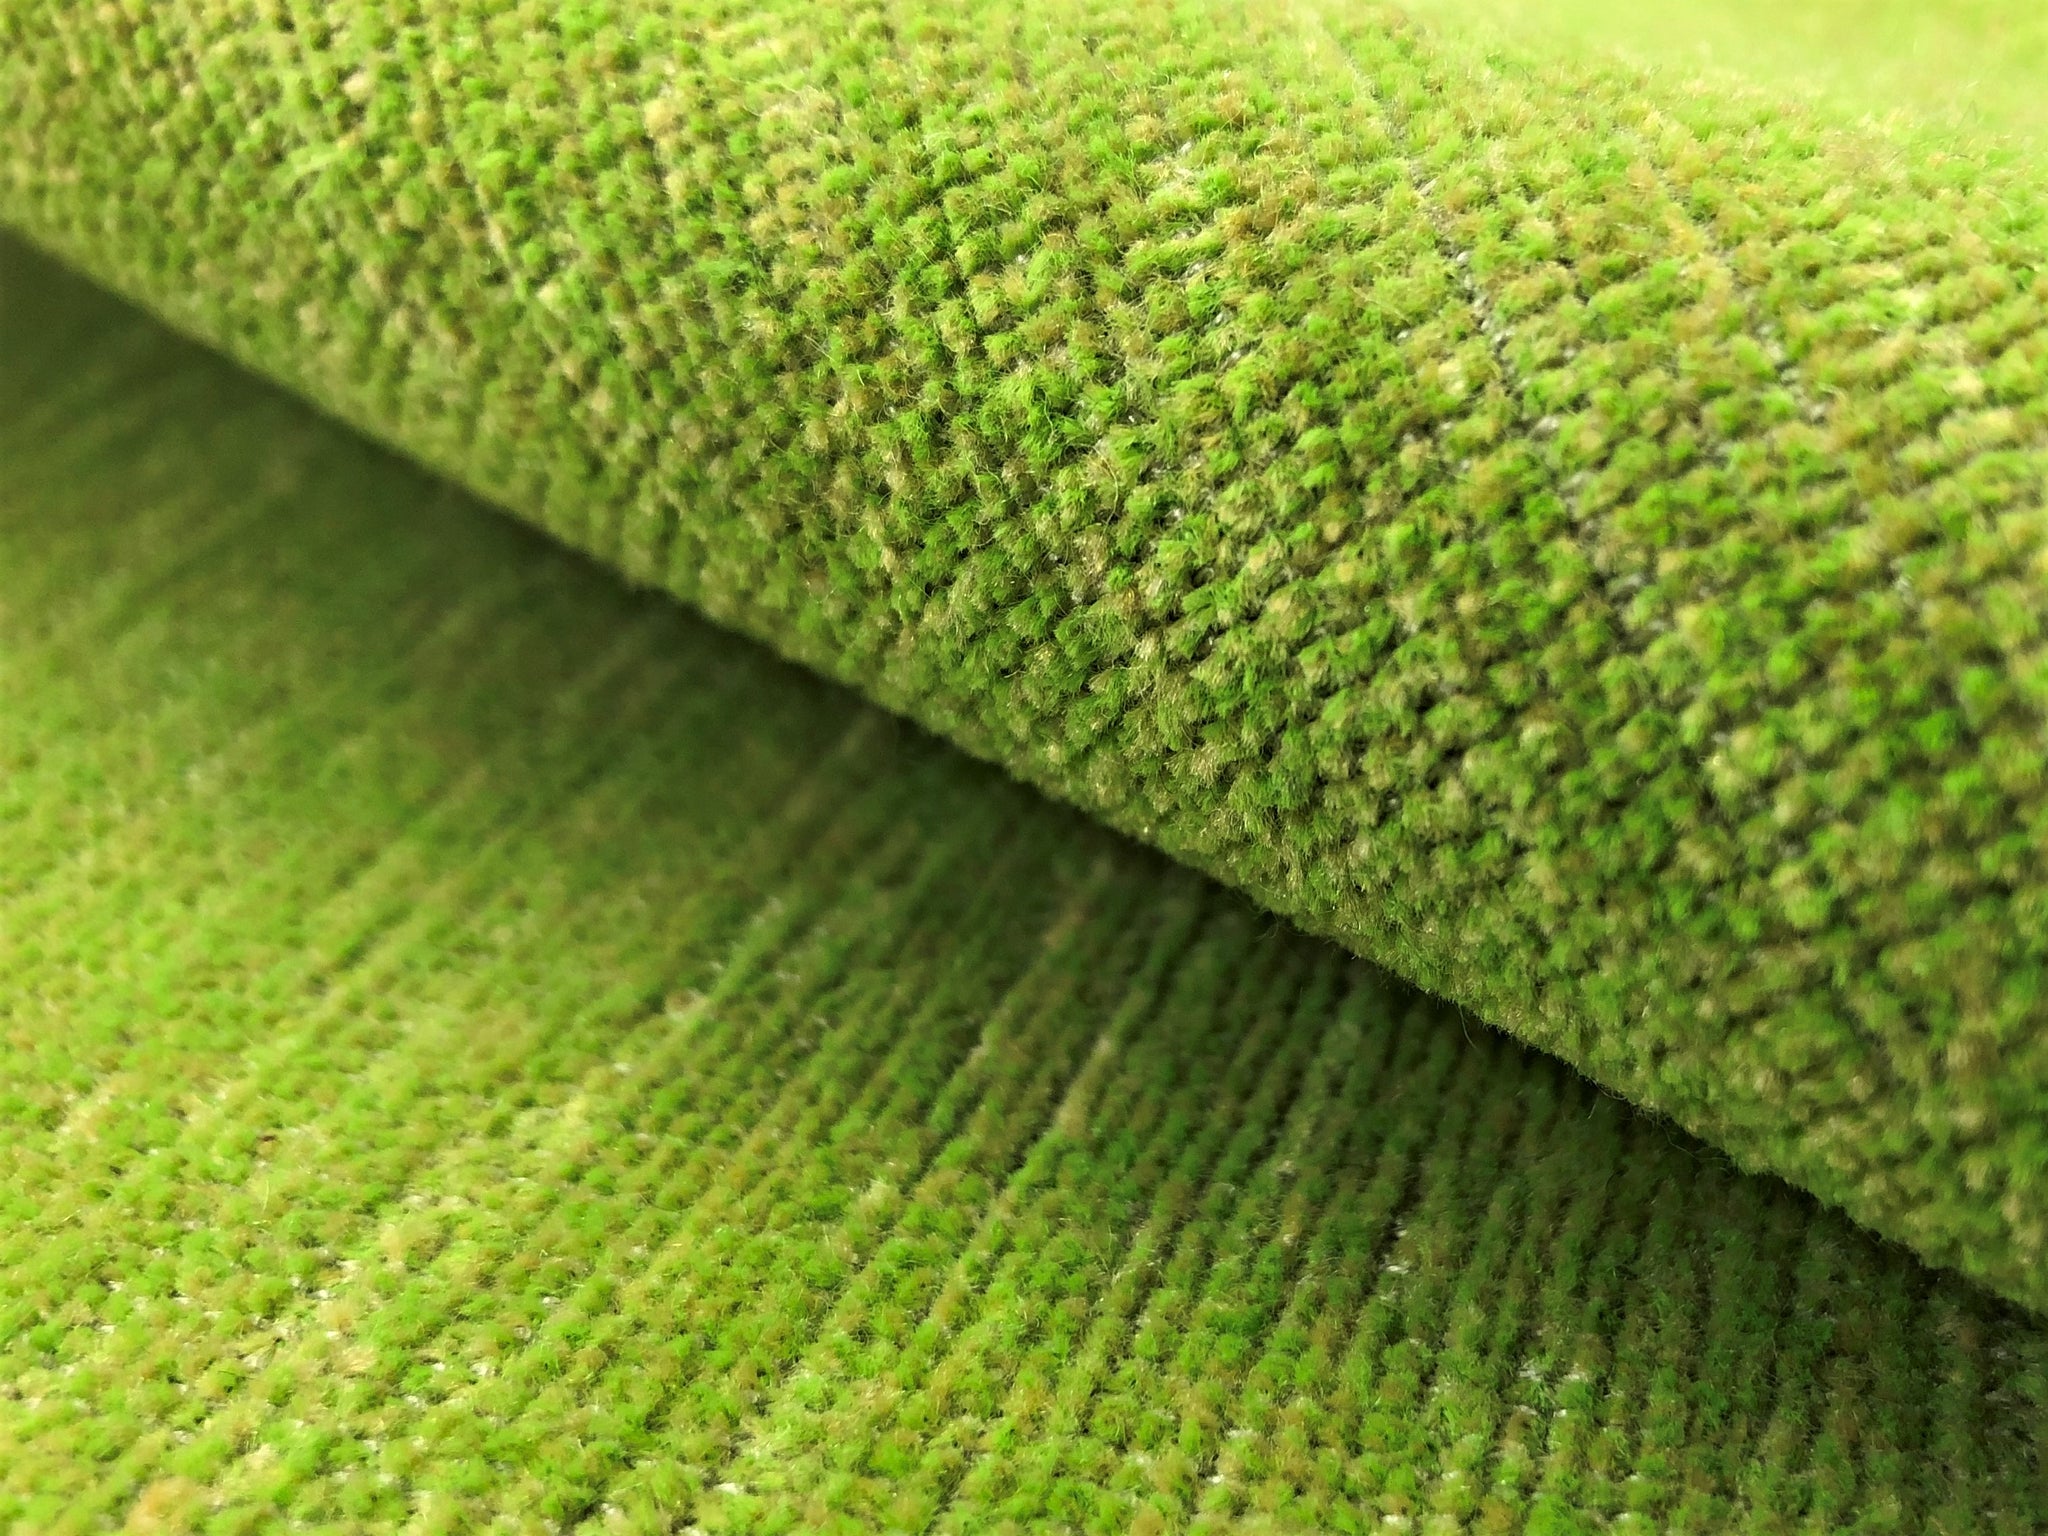 Sava Sweet Grass Green Chenille Upholstery Chenille Fabric by the